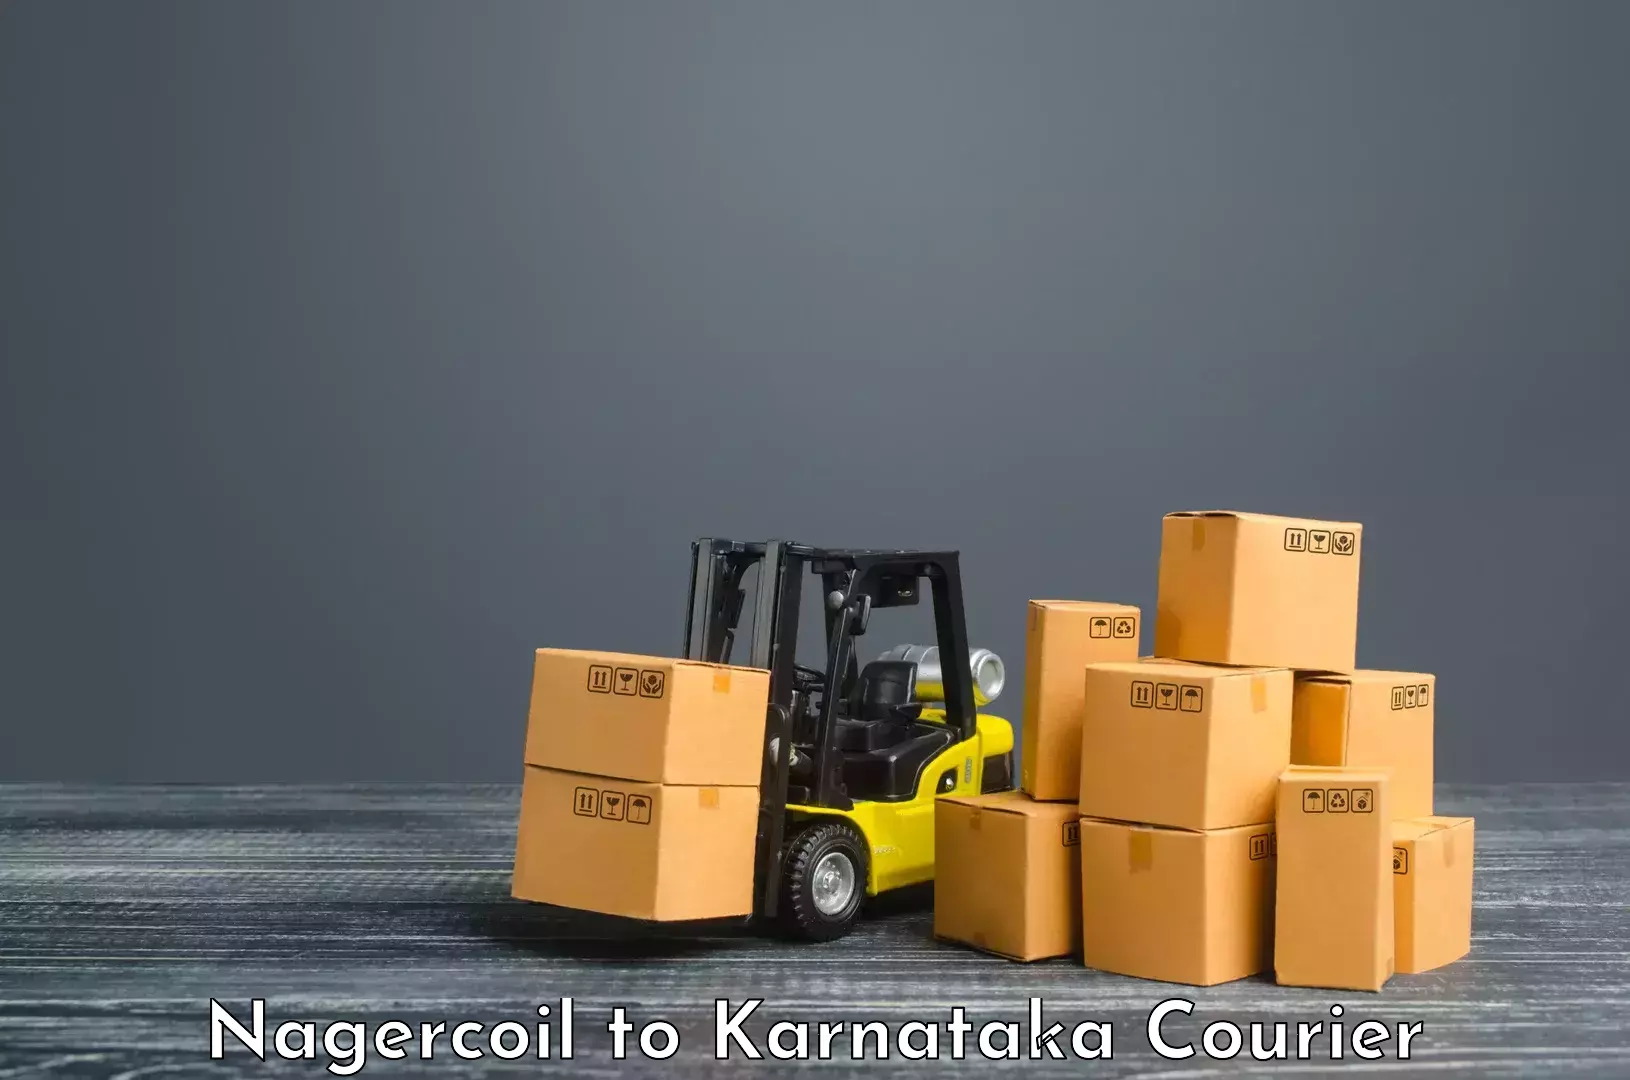 Package delivery network Nagercoil to Bangarapet